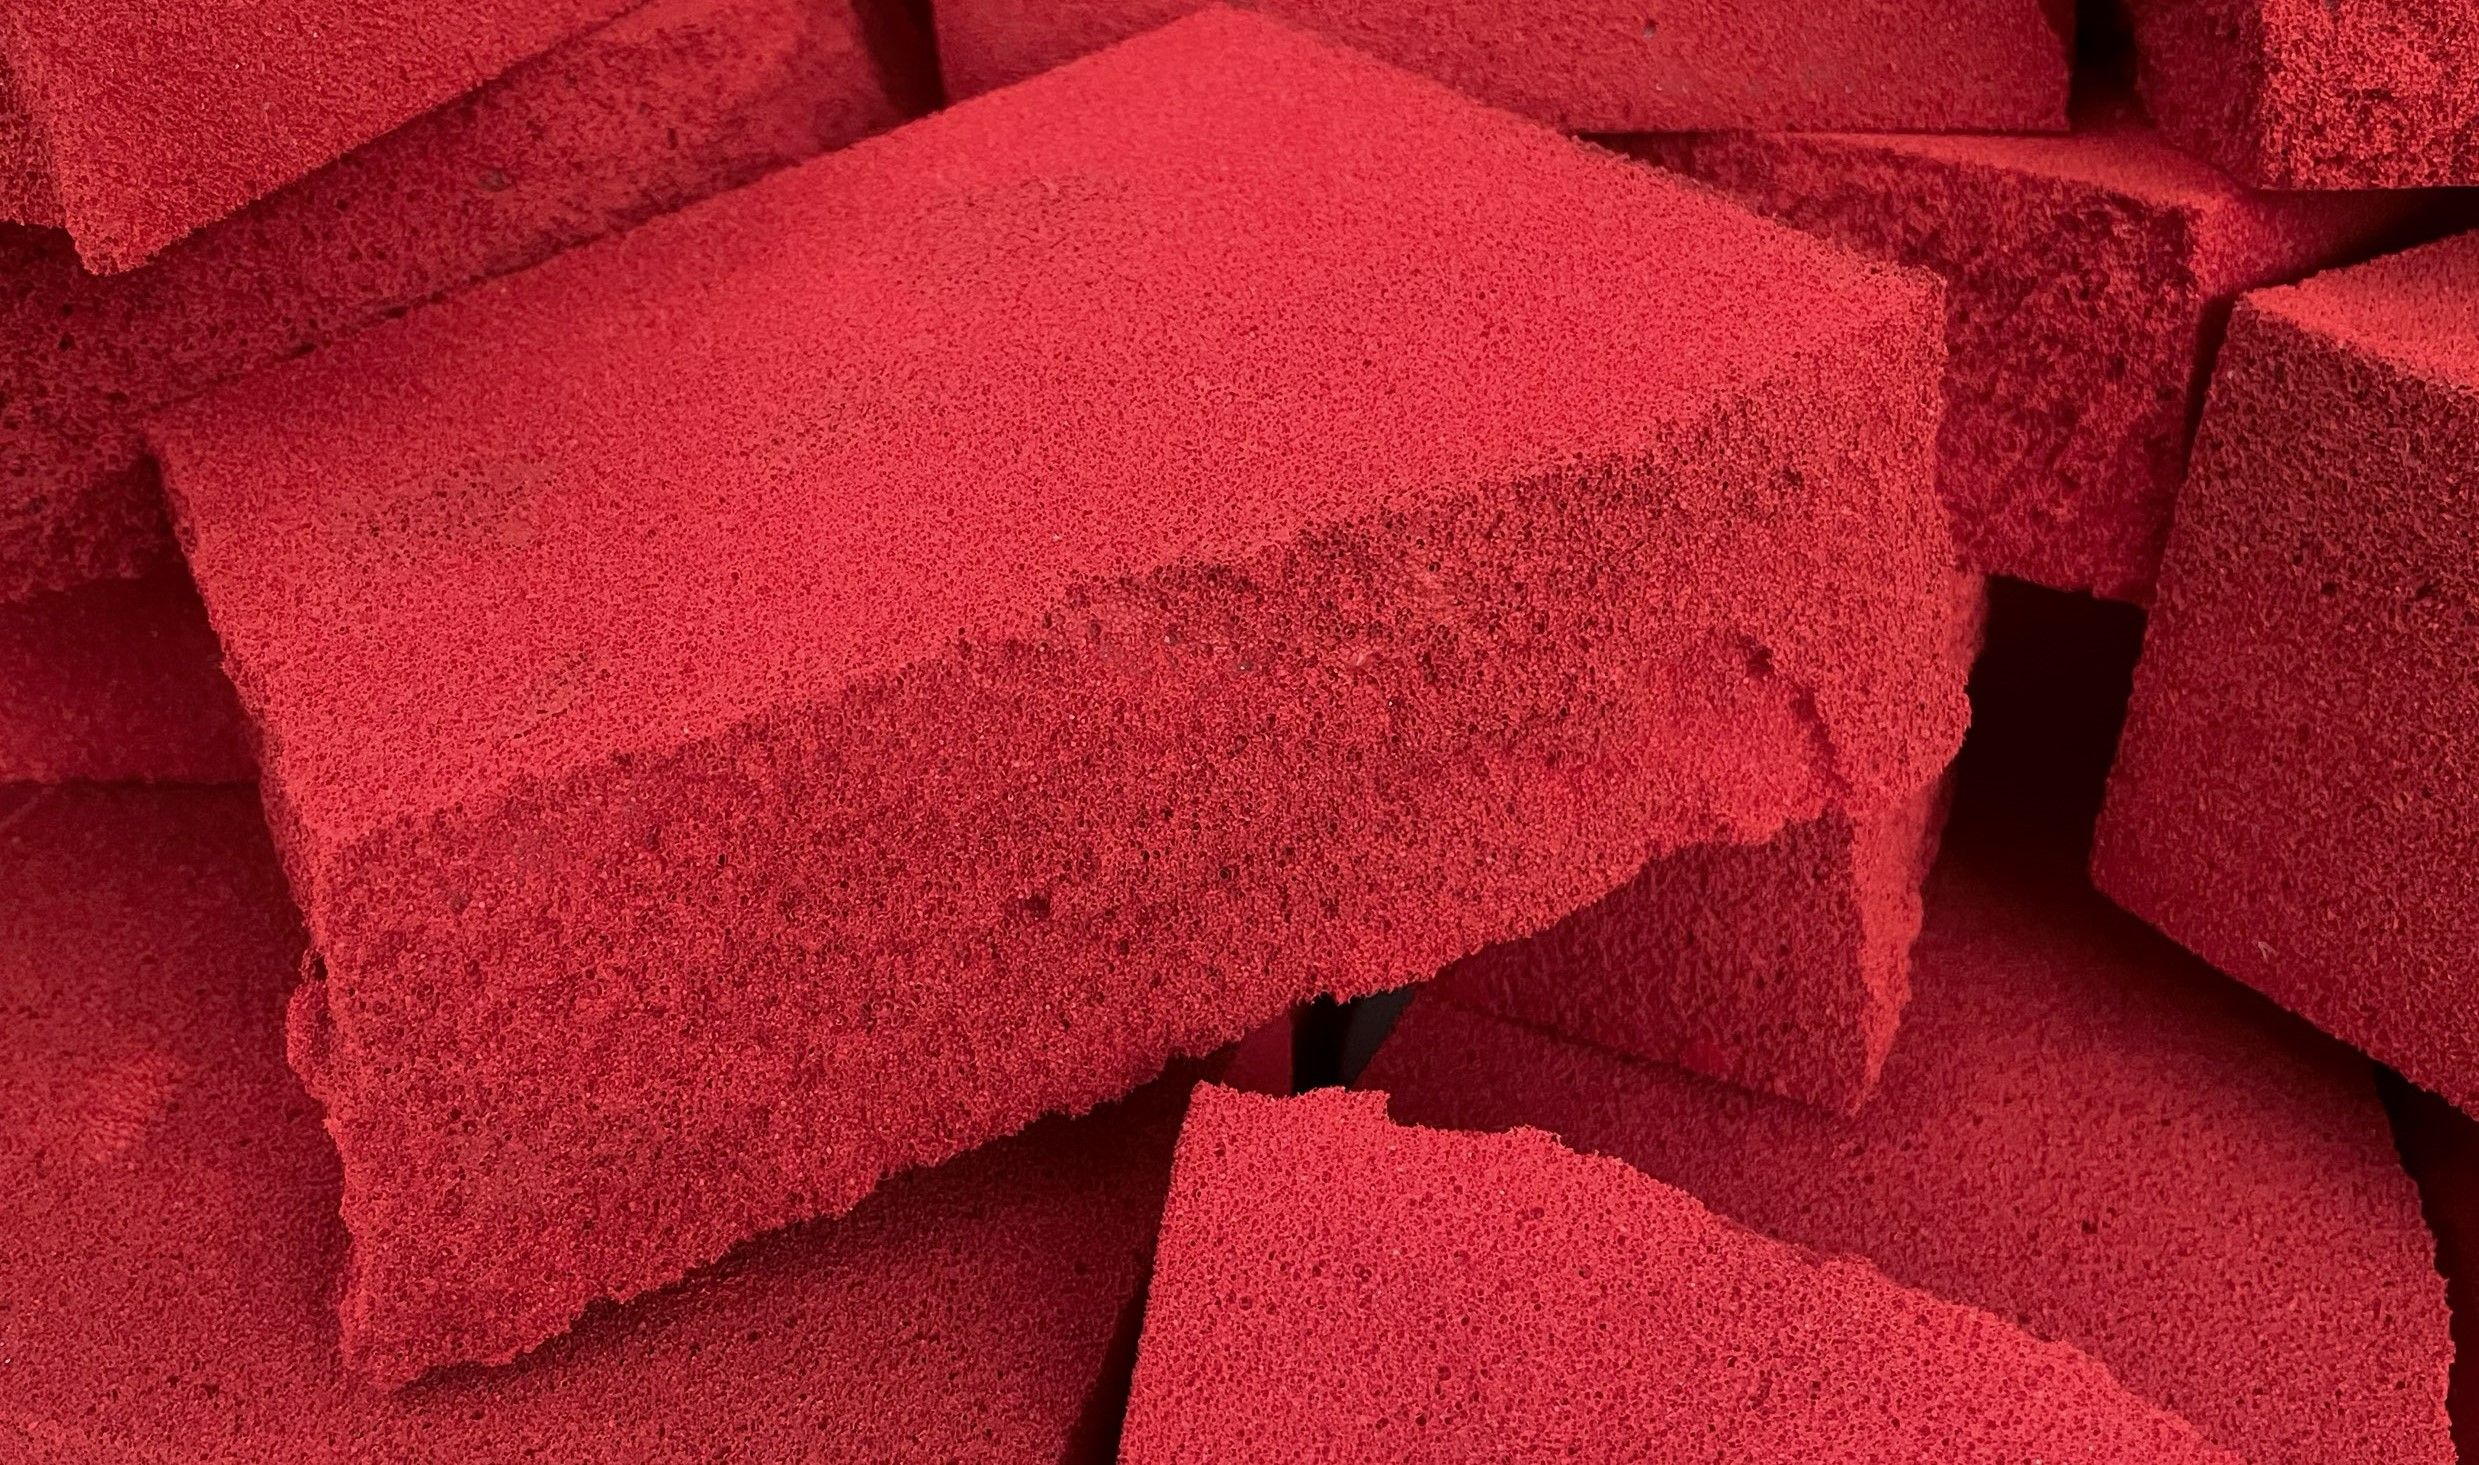 Large rectangular chunks of red foam are piled on top of one another